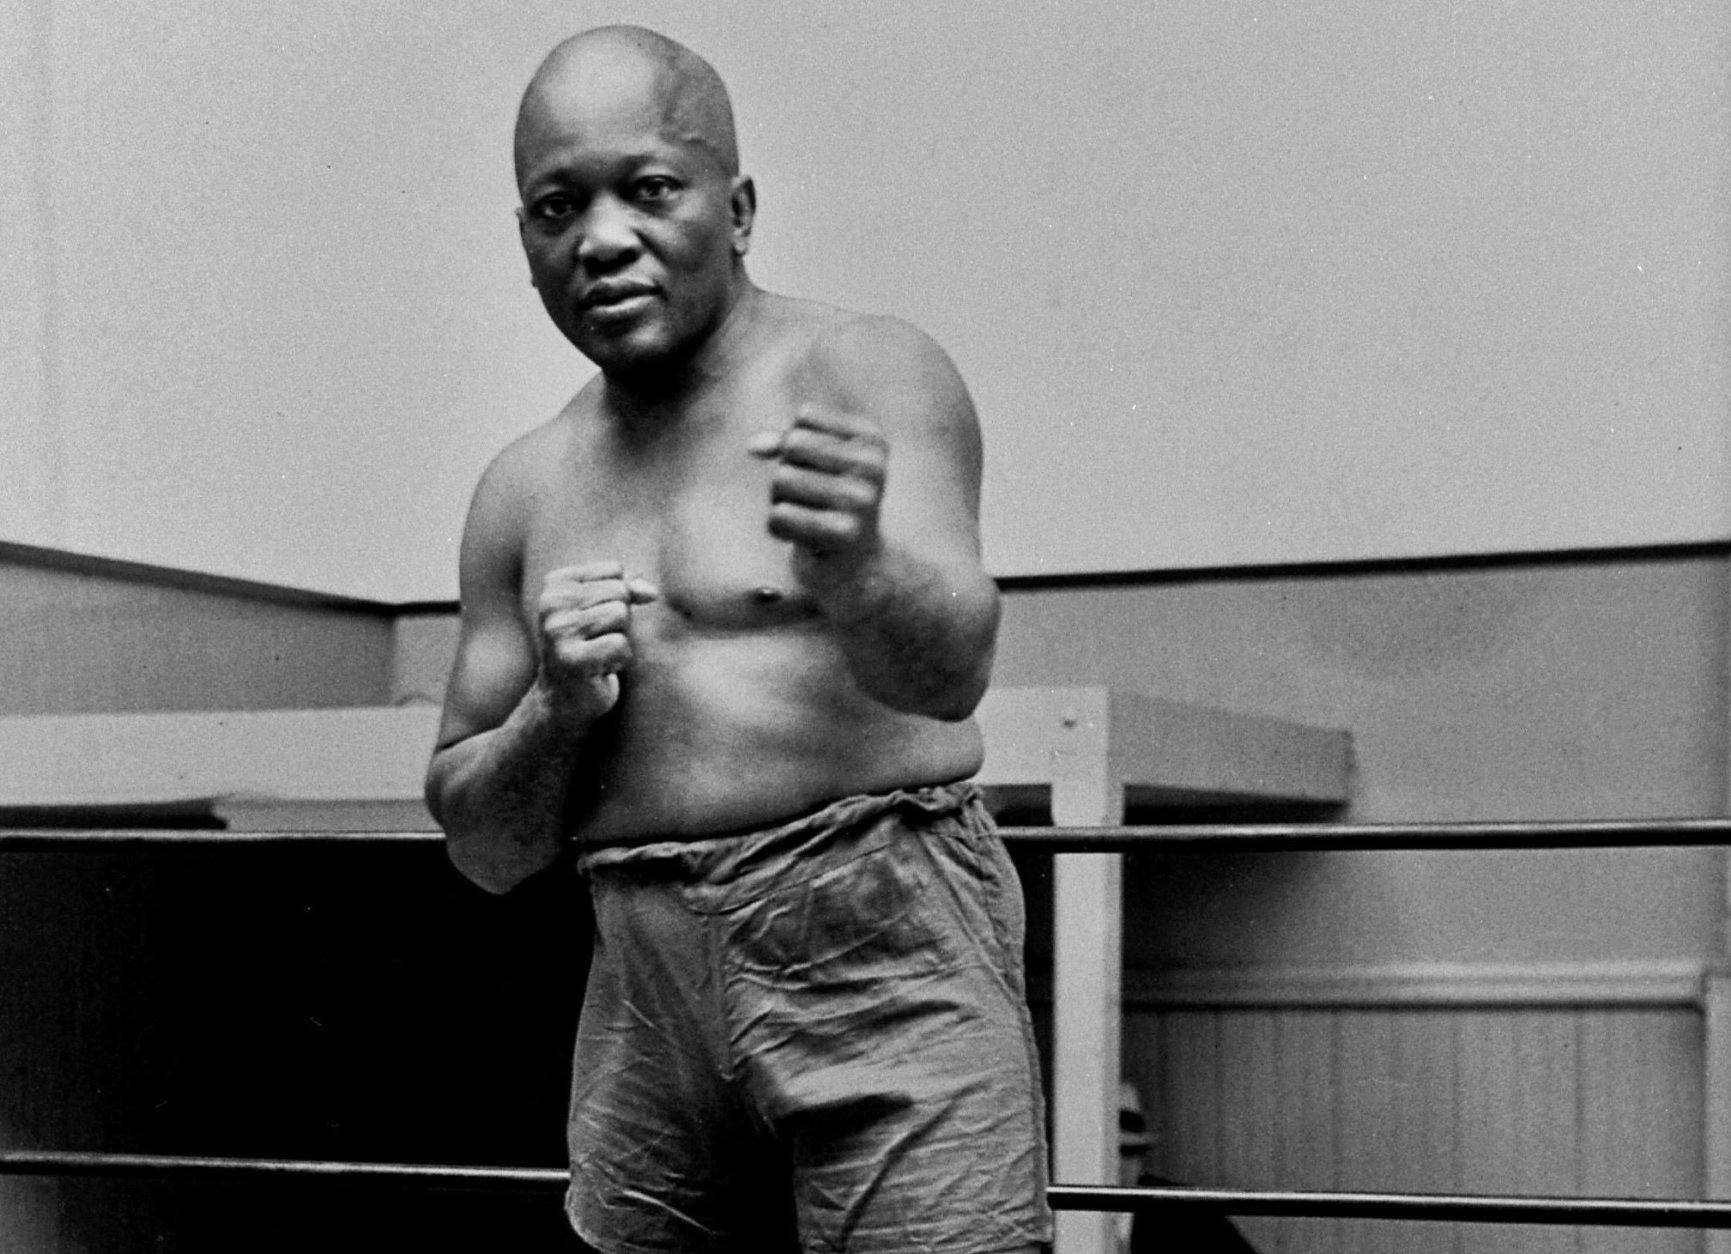 FILE - In this 1932 file photo, boxer Jack Johnson, the first black world heavyweight champion, poses in New York City.  A Texas Gulf Coast home where Johnson once lived has been heavily damaged in a fire.
The blaze caused a wall to collapse in the vacant home Friday, April 5, 2019 in Galveston, Texas. Fire Chief Mike Wisko said that the building was in the process of being renovated. (AP Photo/File)